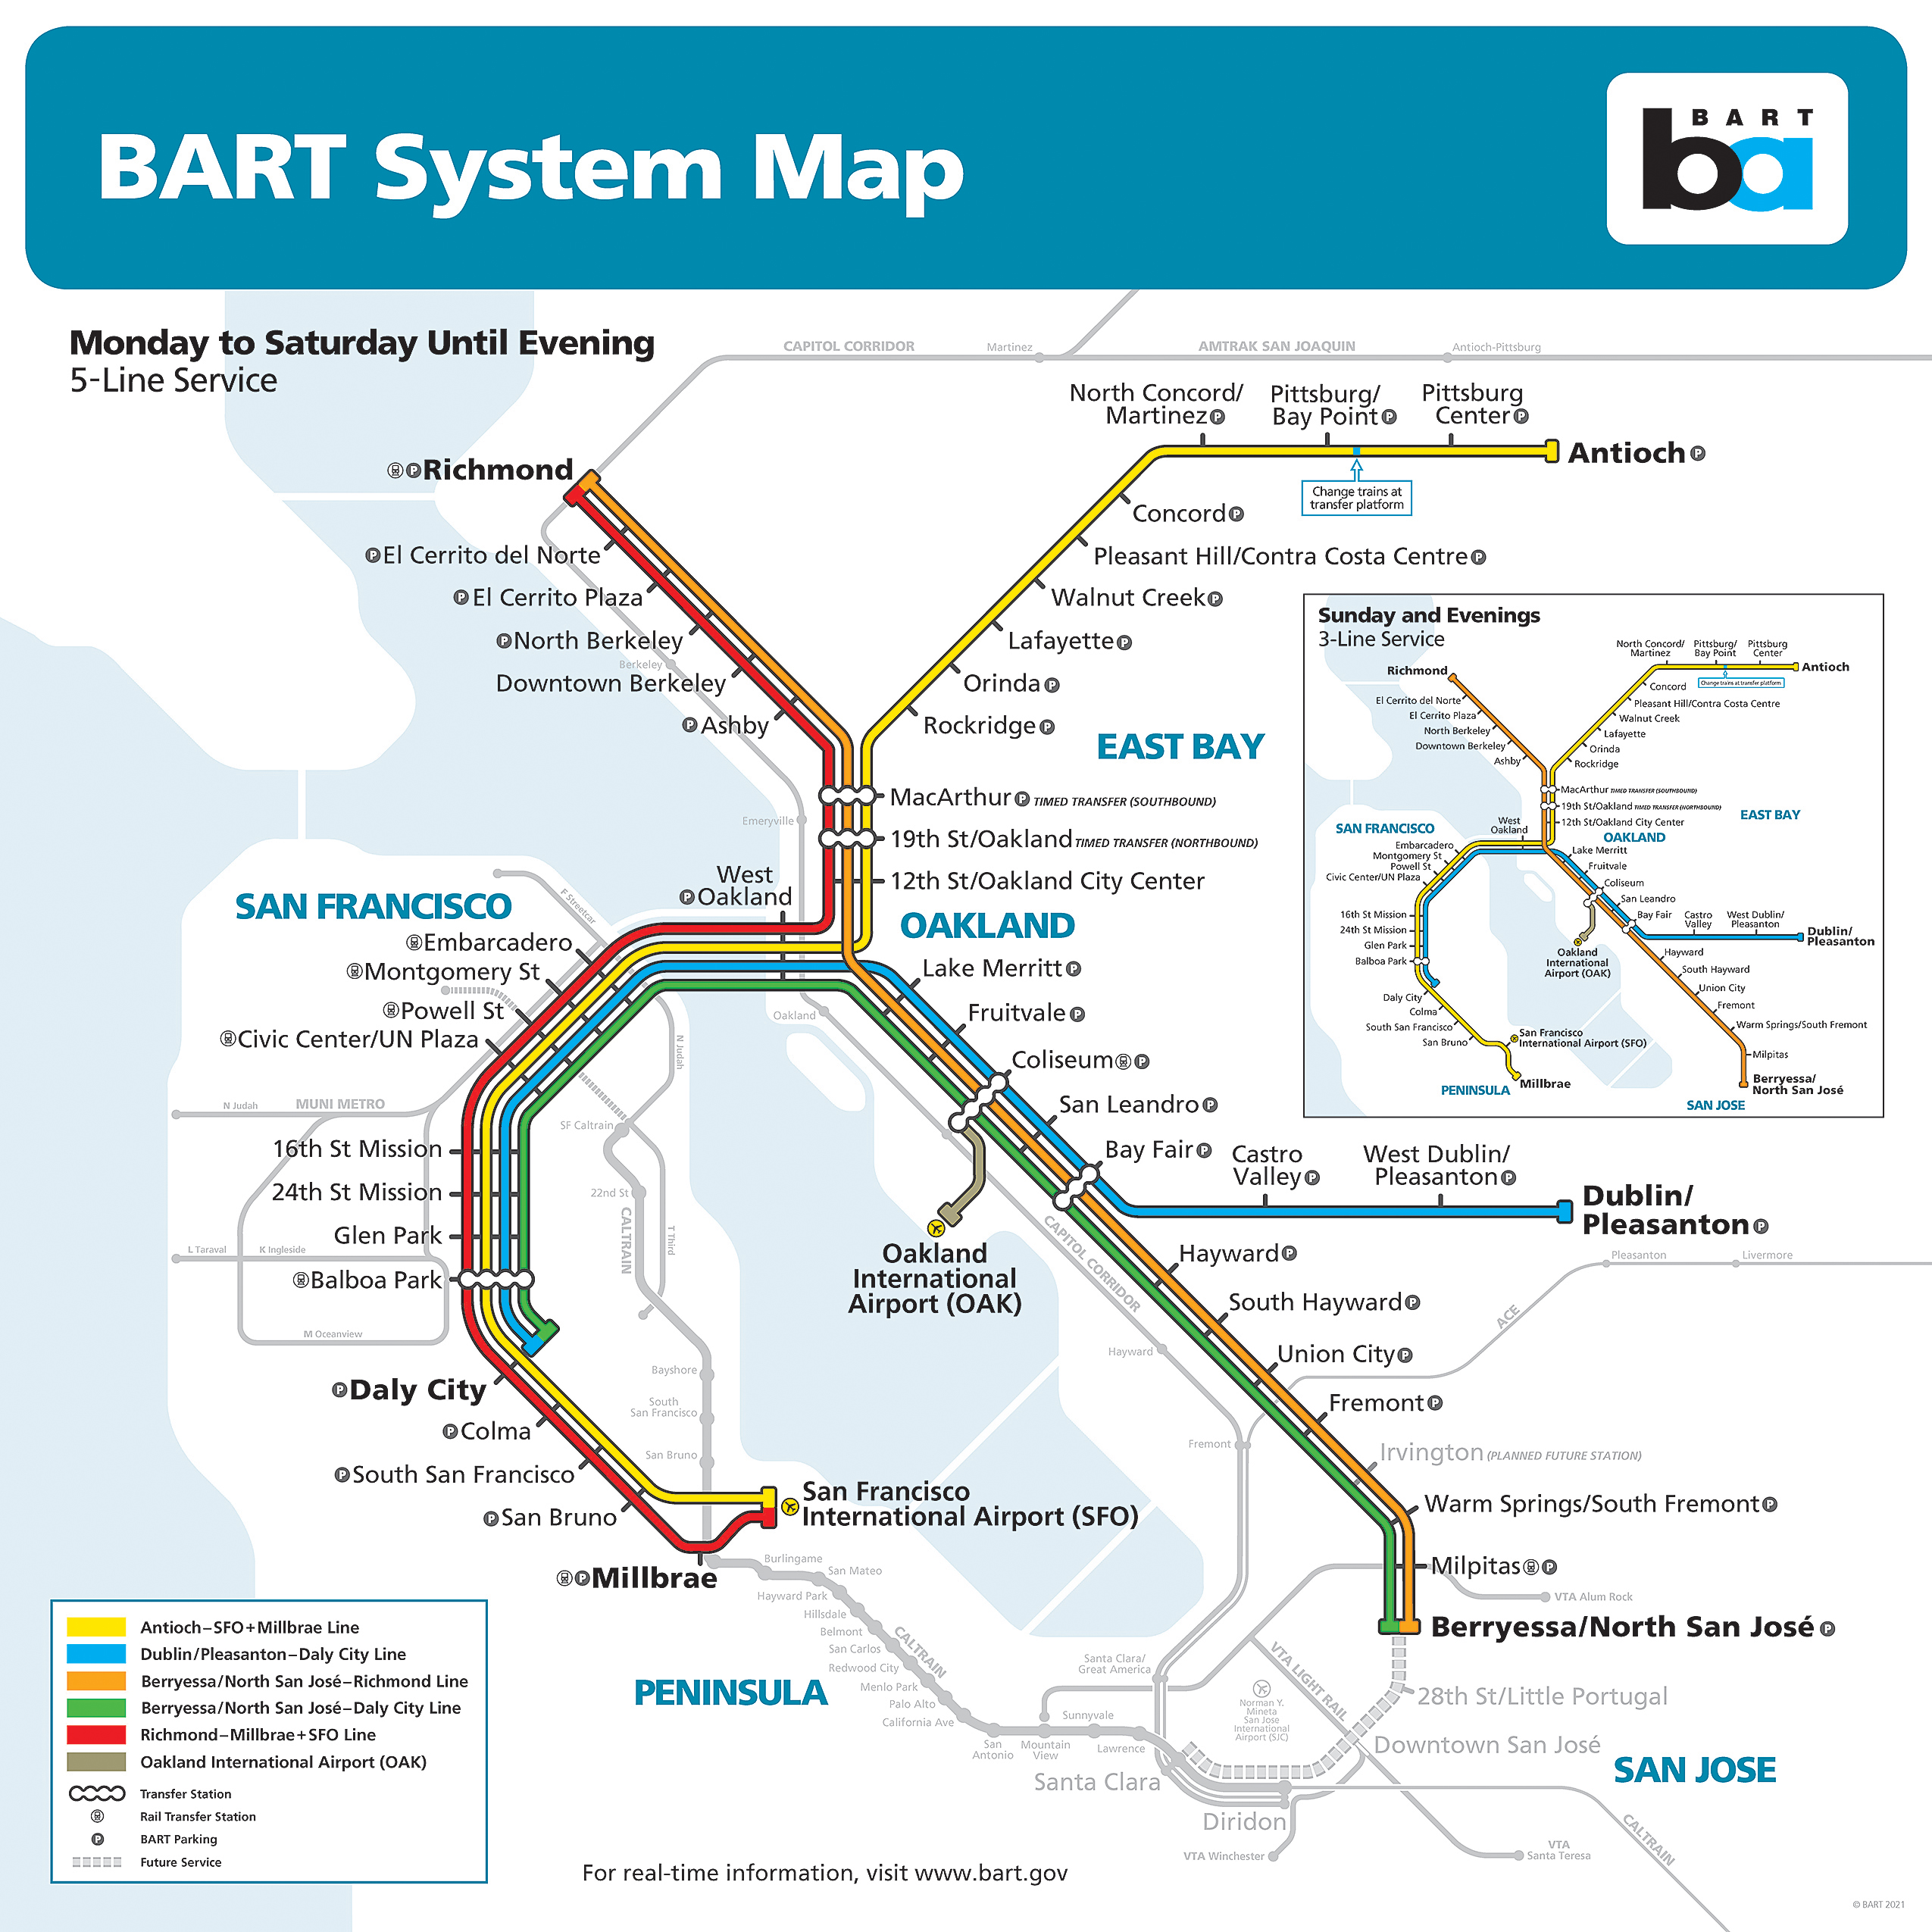 BART system map starting August 2, 2021